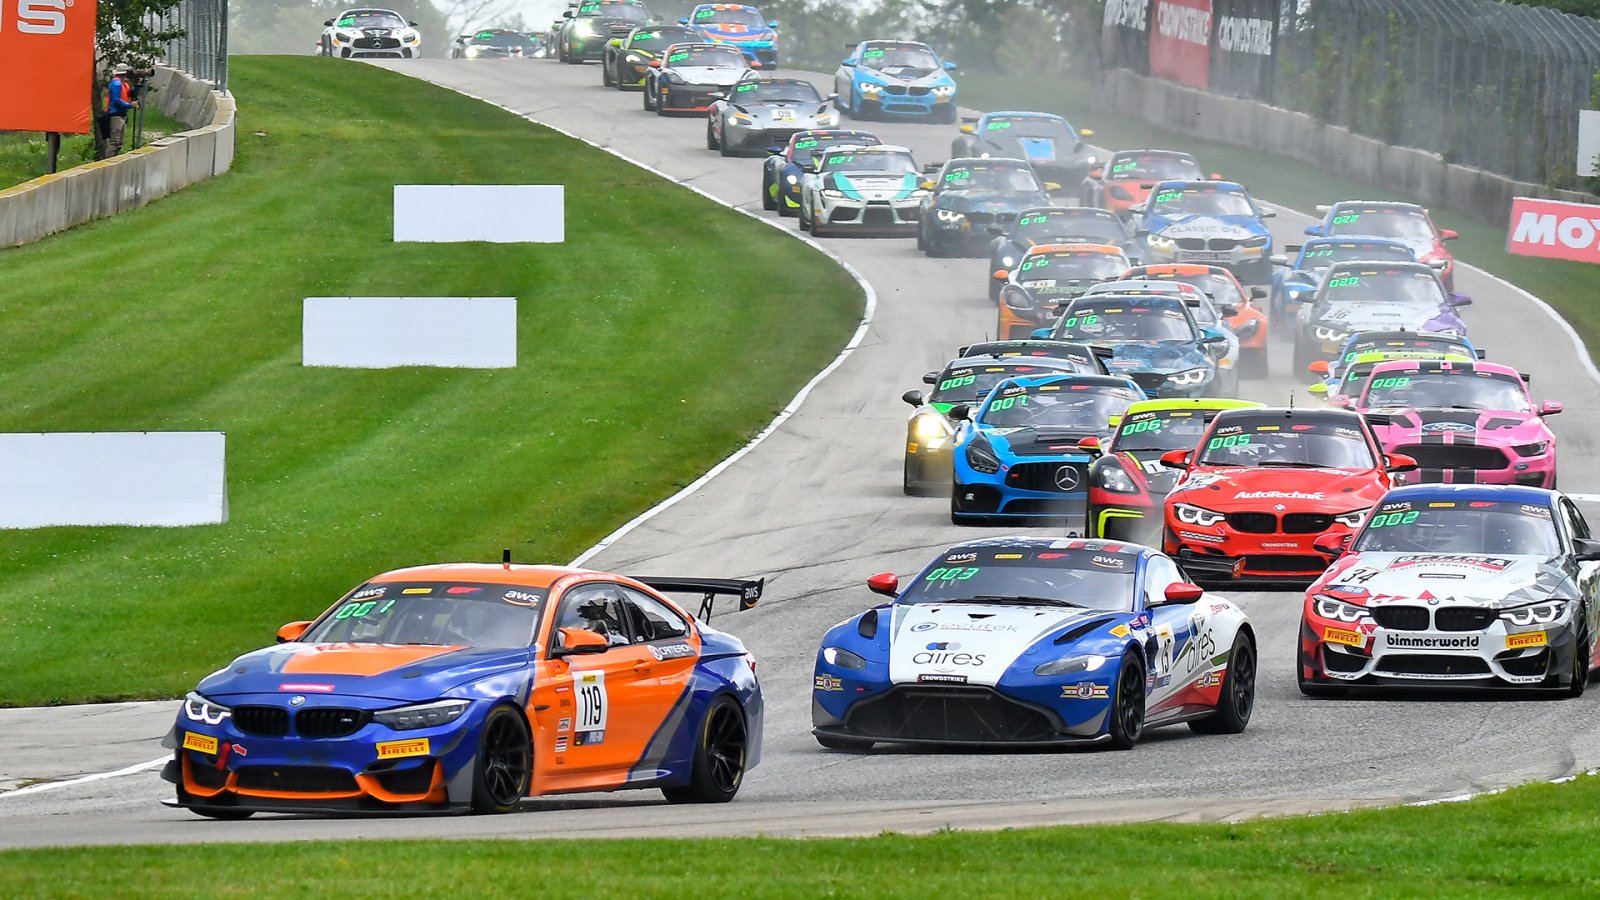 Quinlan, Liefooghe Capture Race 2 Win at Road America